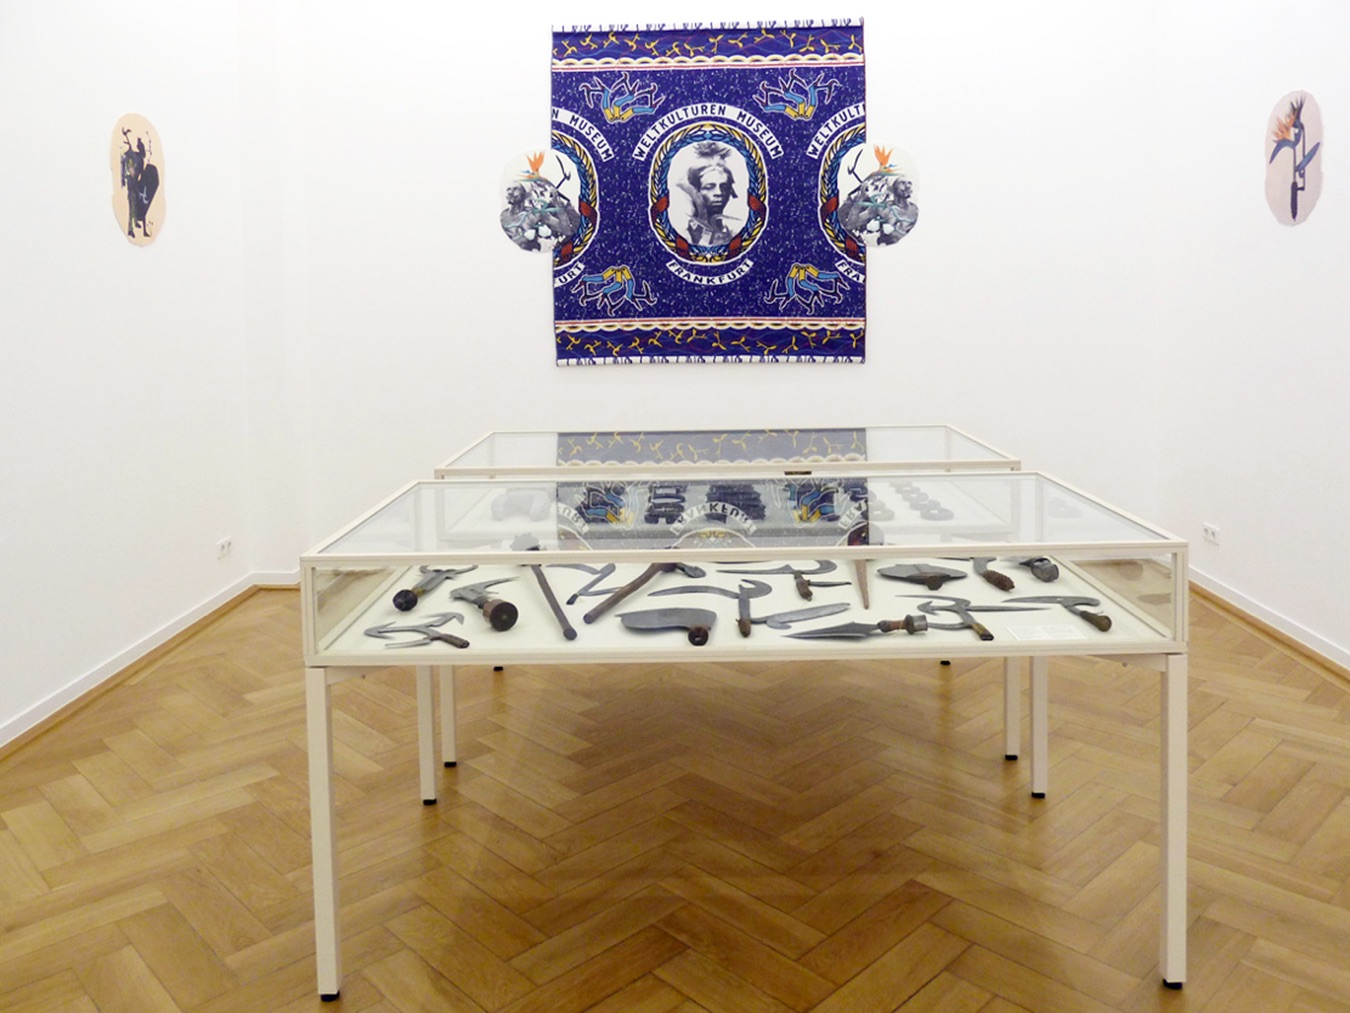 Object Atlas - Facing the Opponent (exhibition view), 2012